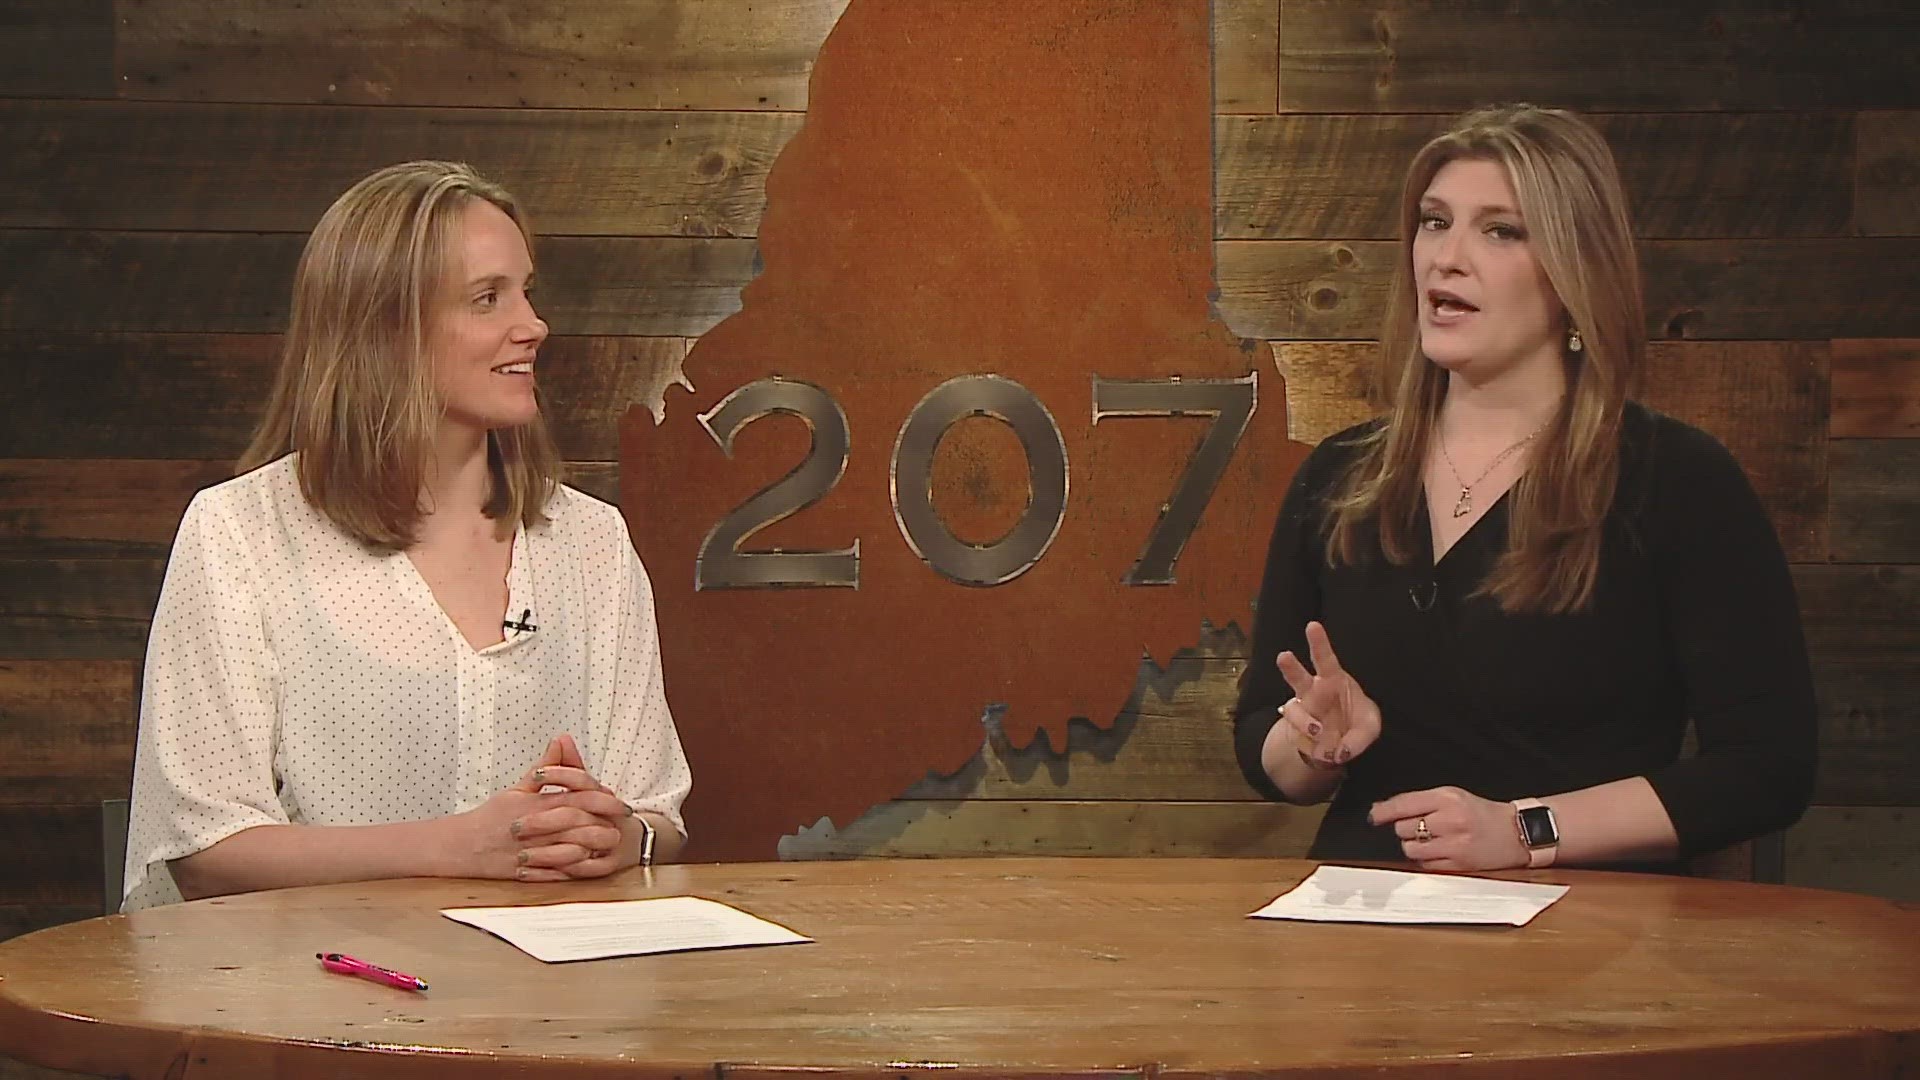 Dr. Allyson Coffin stopped by the 207 studio to share tips for travelers, whether they're driving or flying.